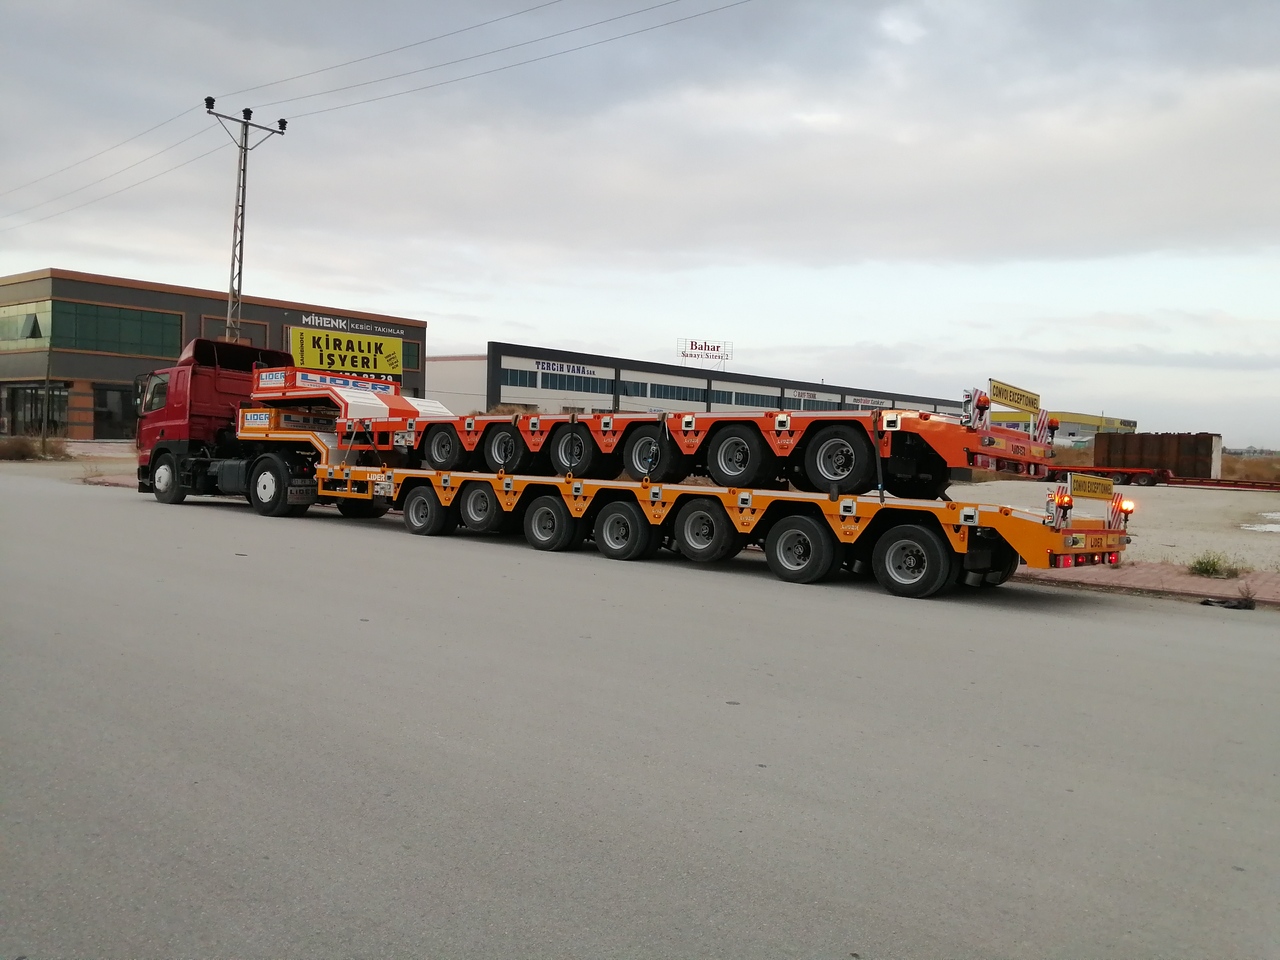 Leasing de LIDER 2024 YEAR NEW MODELS containeer flatbes semi TRAILER FOR SALE LIDER 2024 YEAR NEW MODELS containeer flatbes semi TRAILER FOR SALE: Foto 1